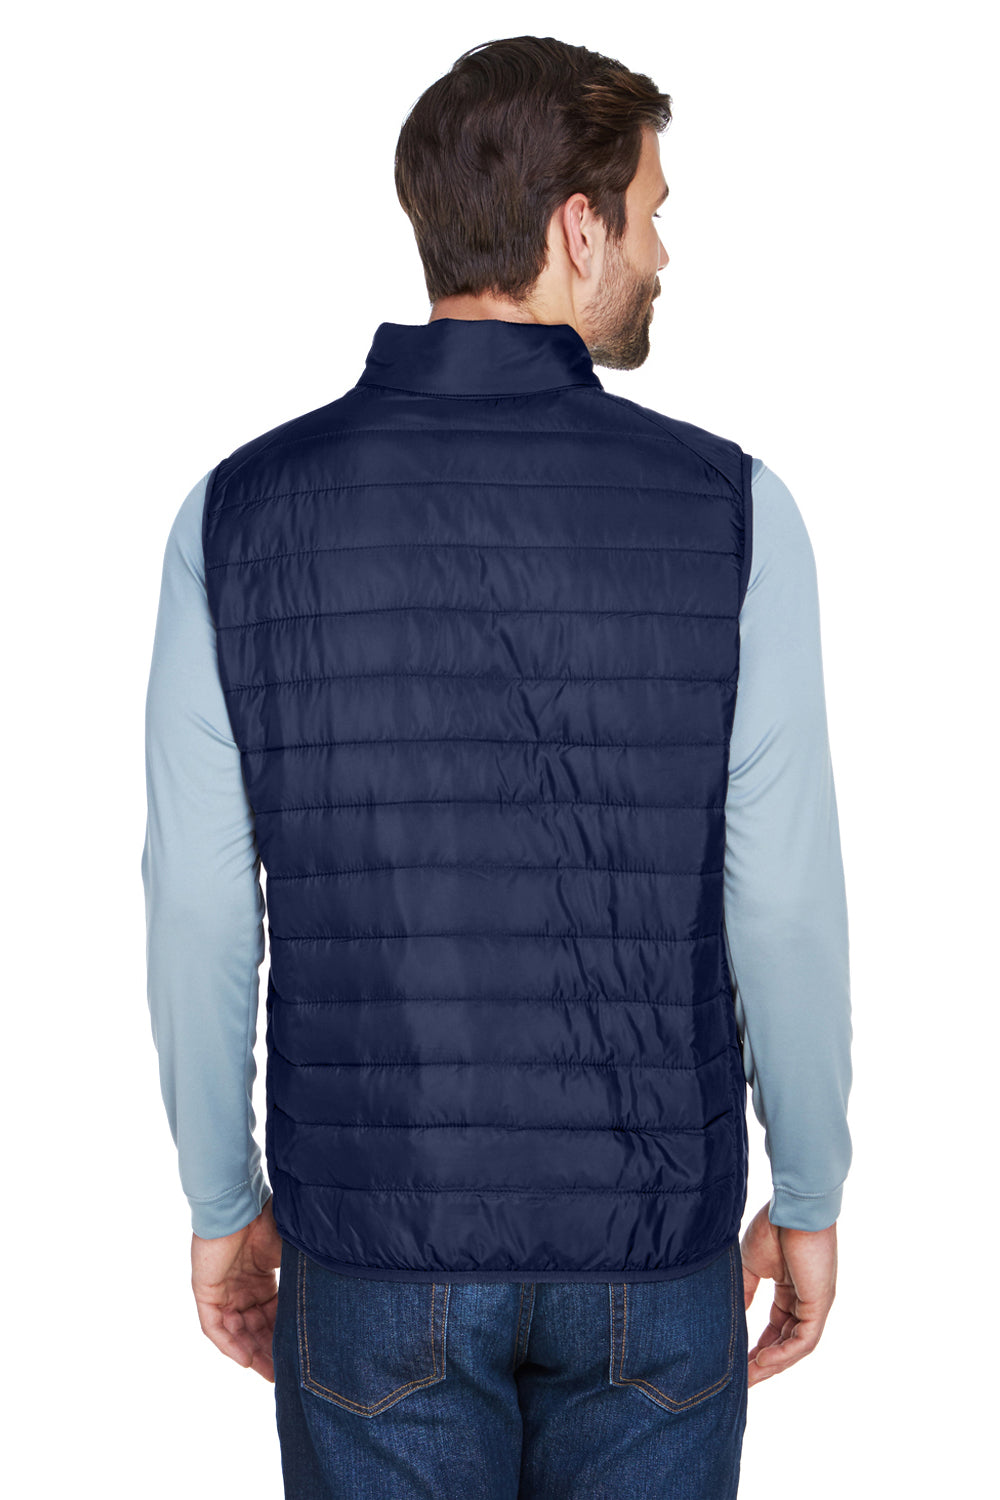 Core 365 CE702 Mens Prevail Packable Puffer Water Resistant Full Zip Vest Navy Blue Back